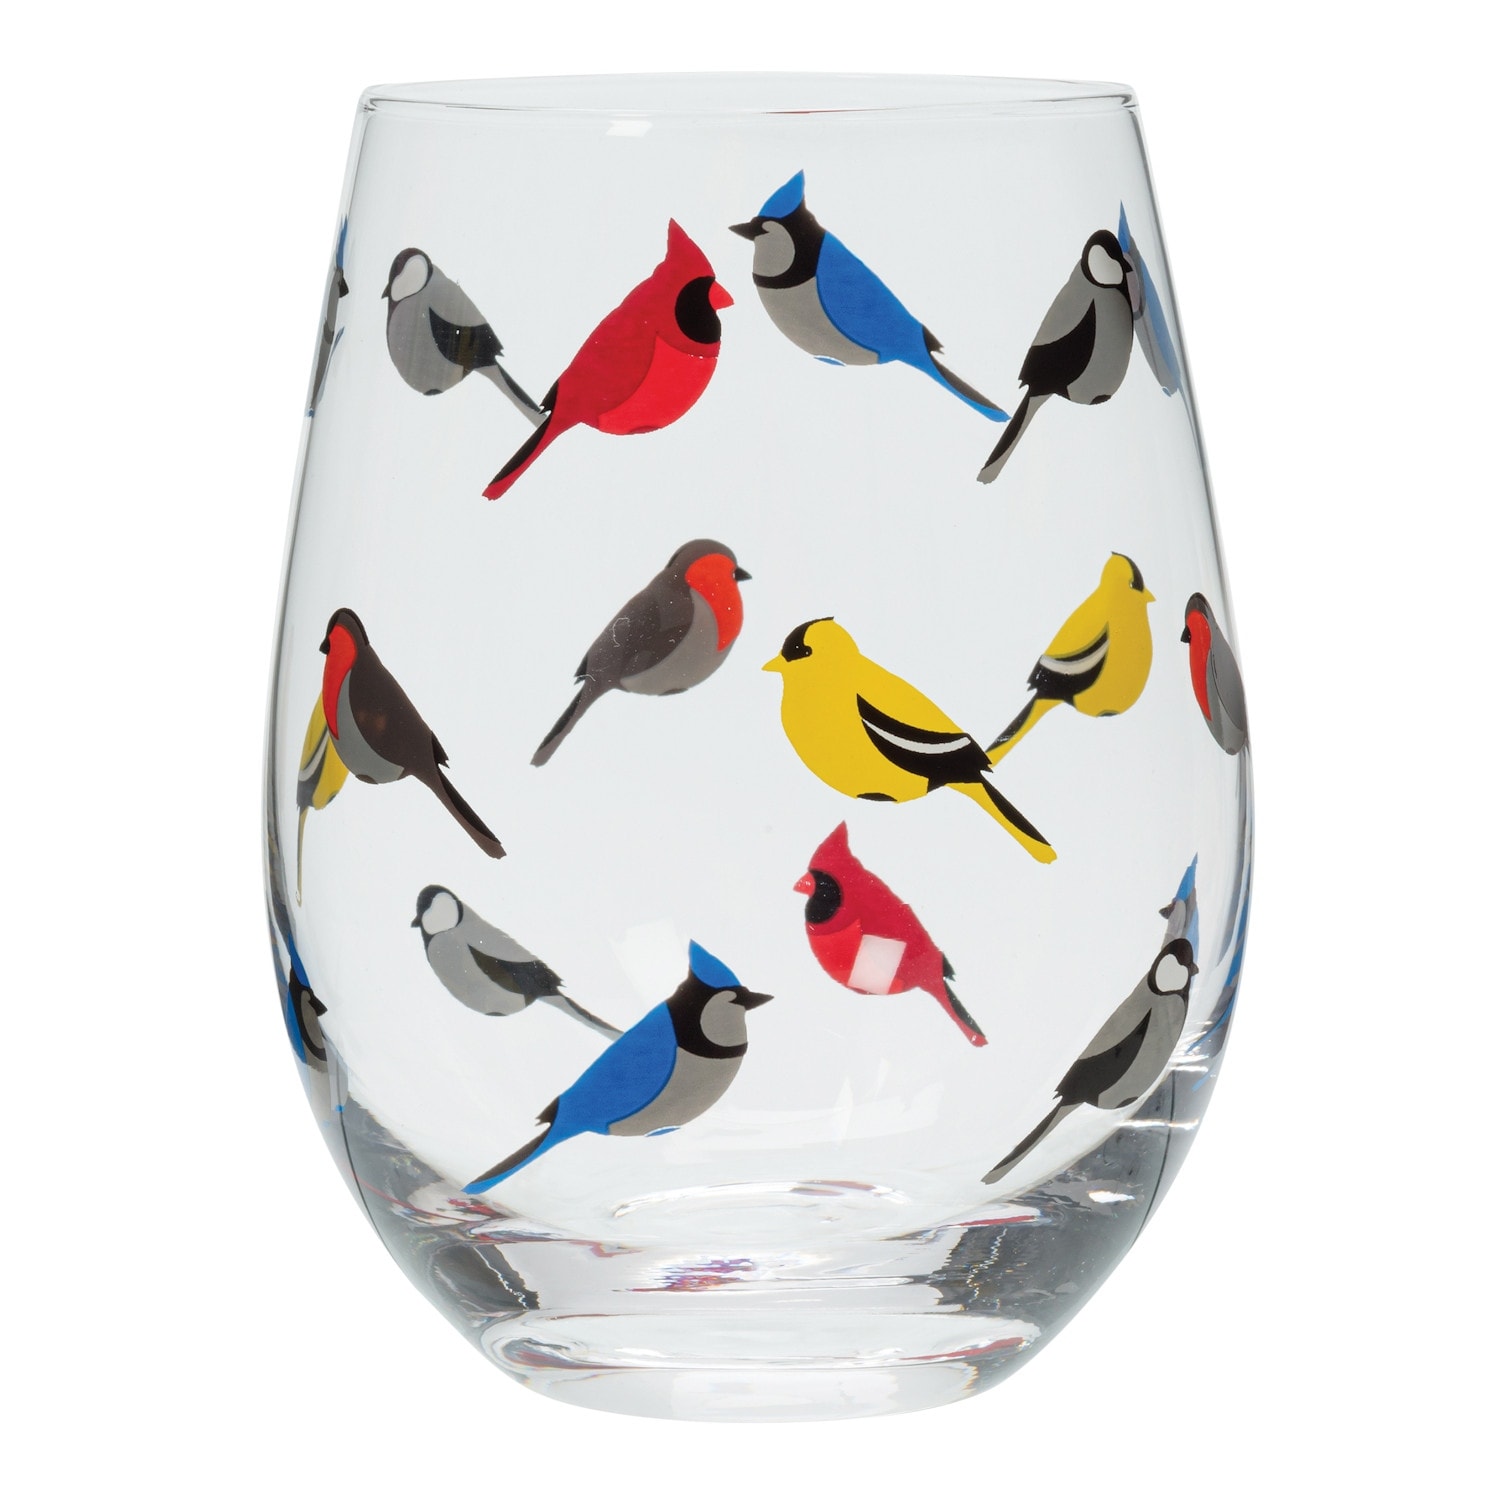 https://ak1.ostkcdn.com/images/products/is/images/direct/ae01ba1a2fee0e89645708e679d2579eede35759/Abbot-Multi-Birds-Stemless-Wine-Glasses---4-pc-Set-Birds-Wine-Glasses%2C-11-oz..jpg